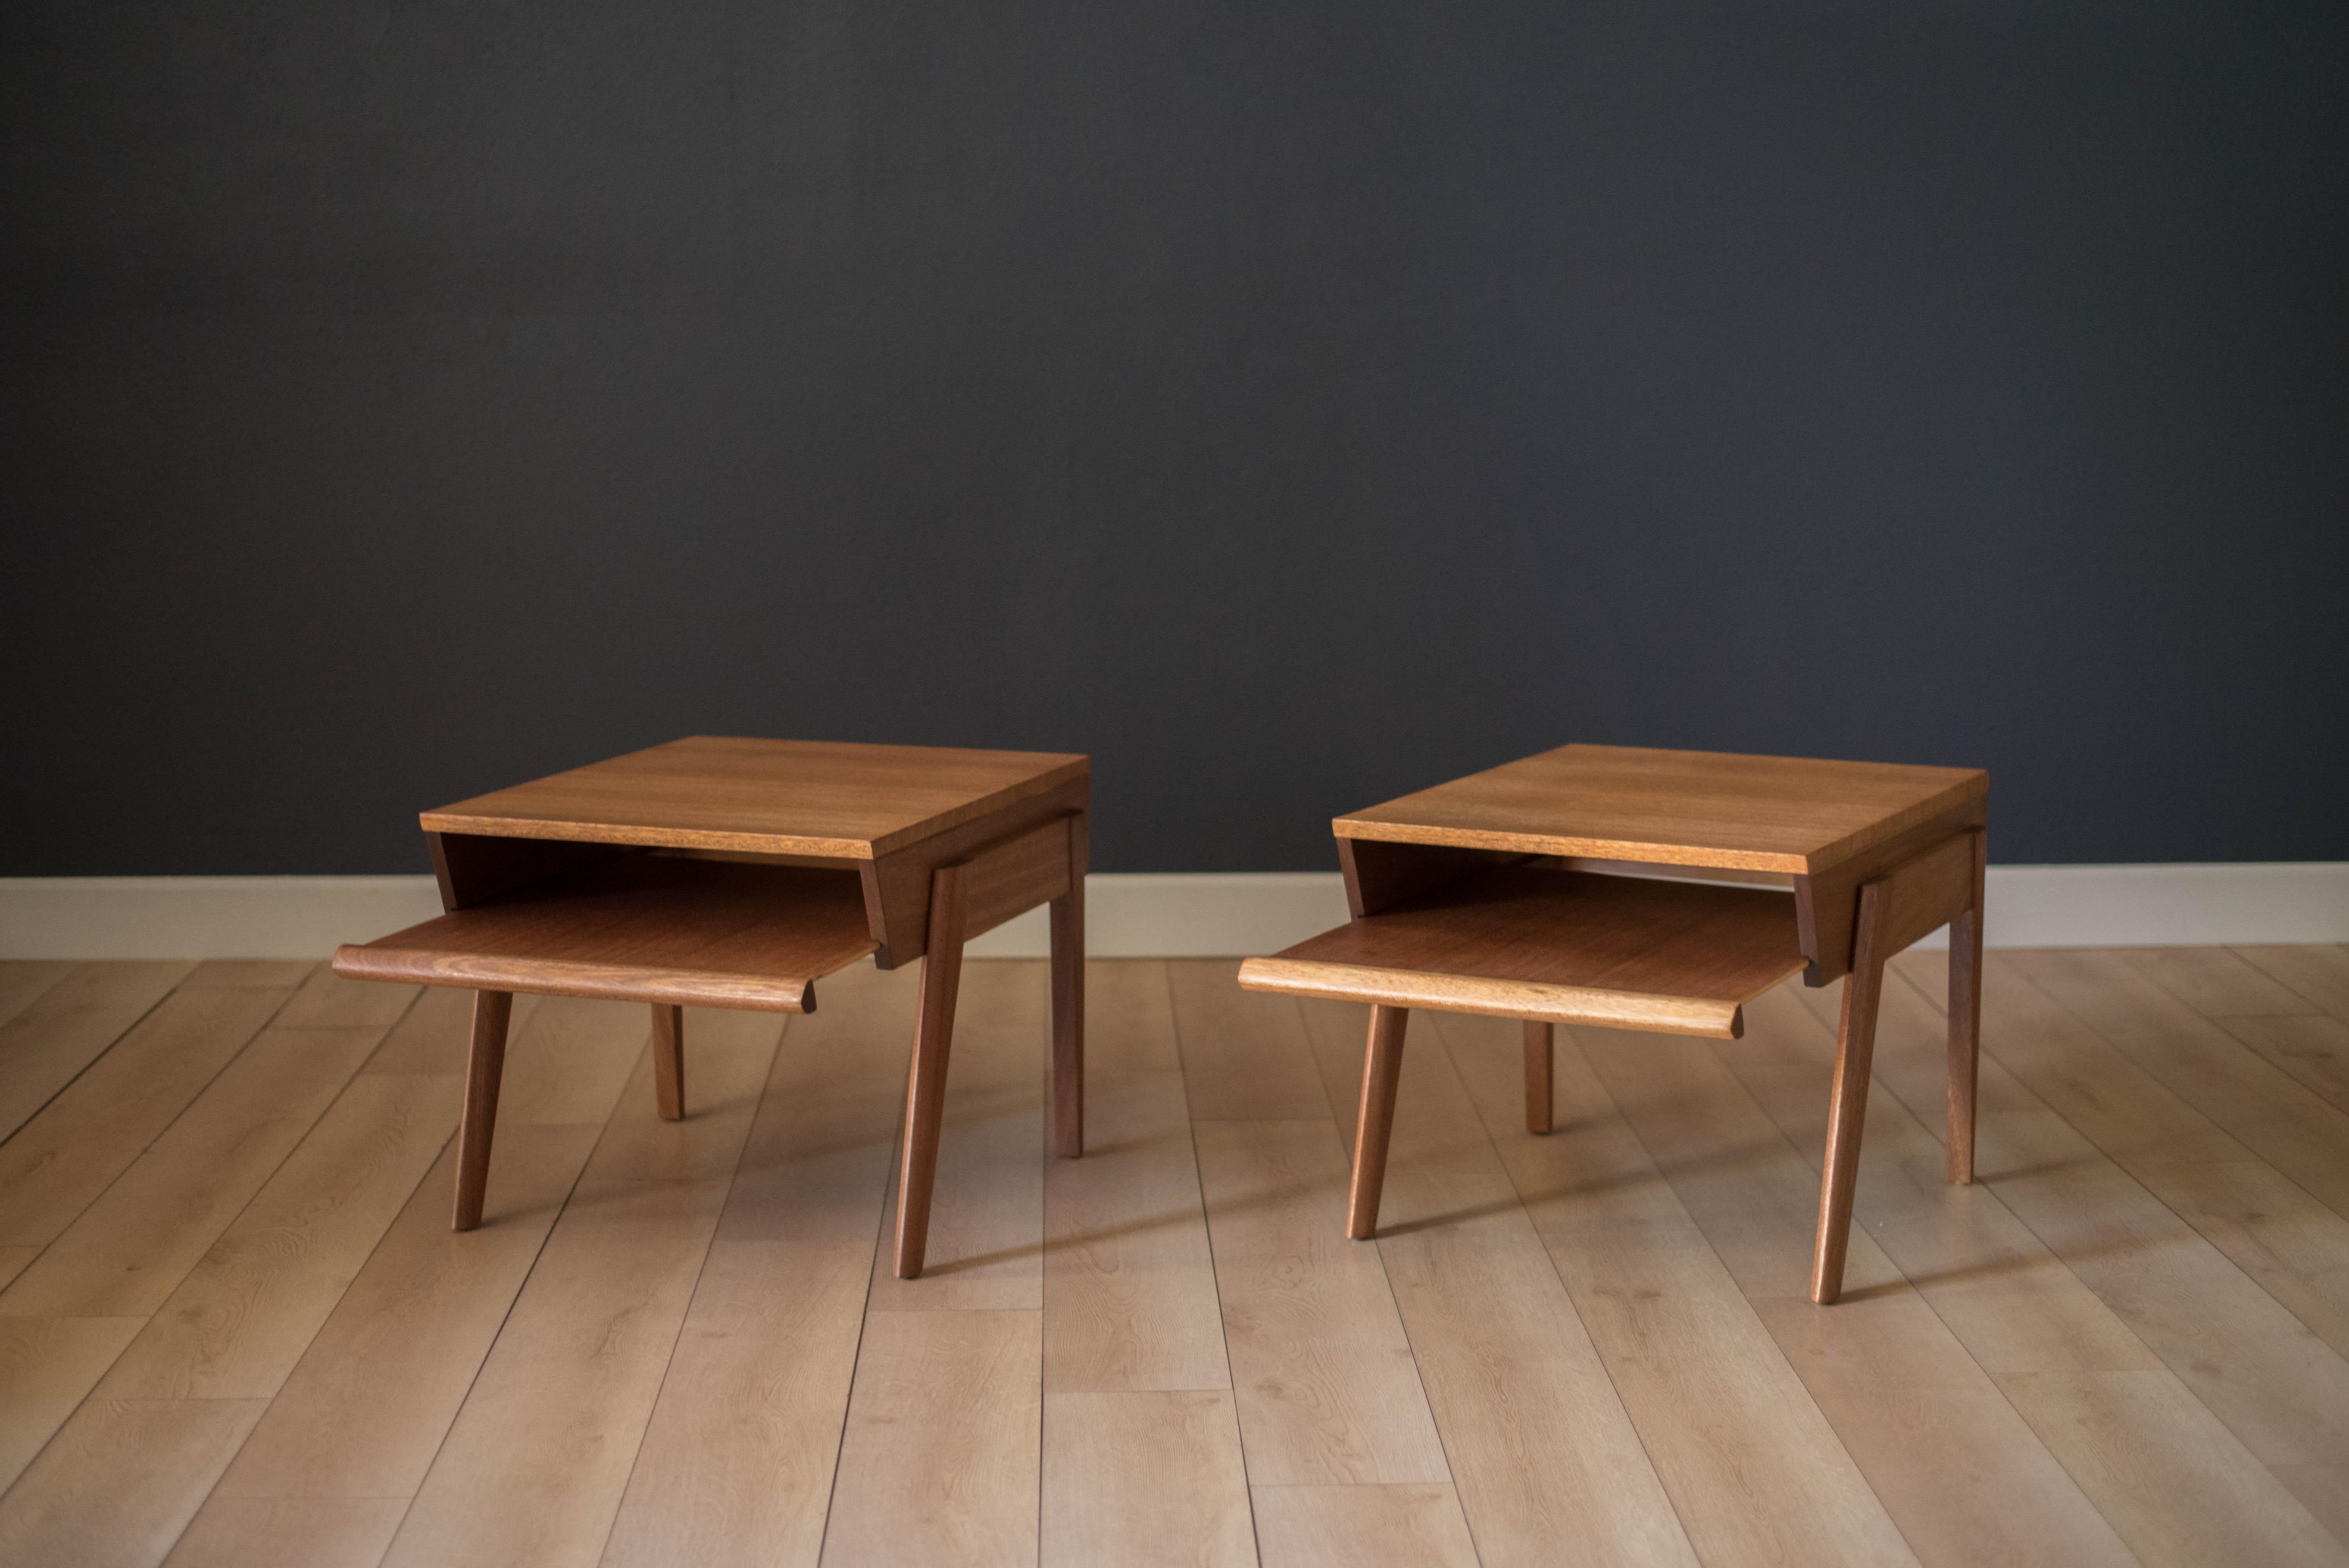 Midcentury End Tables by John Keal for Brown Saltman, California. This pair is made of mahogany and features a unique sliding open tray drawer. Price is for the pair.